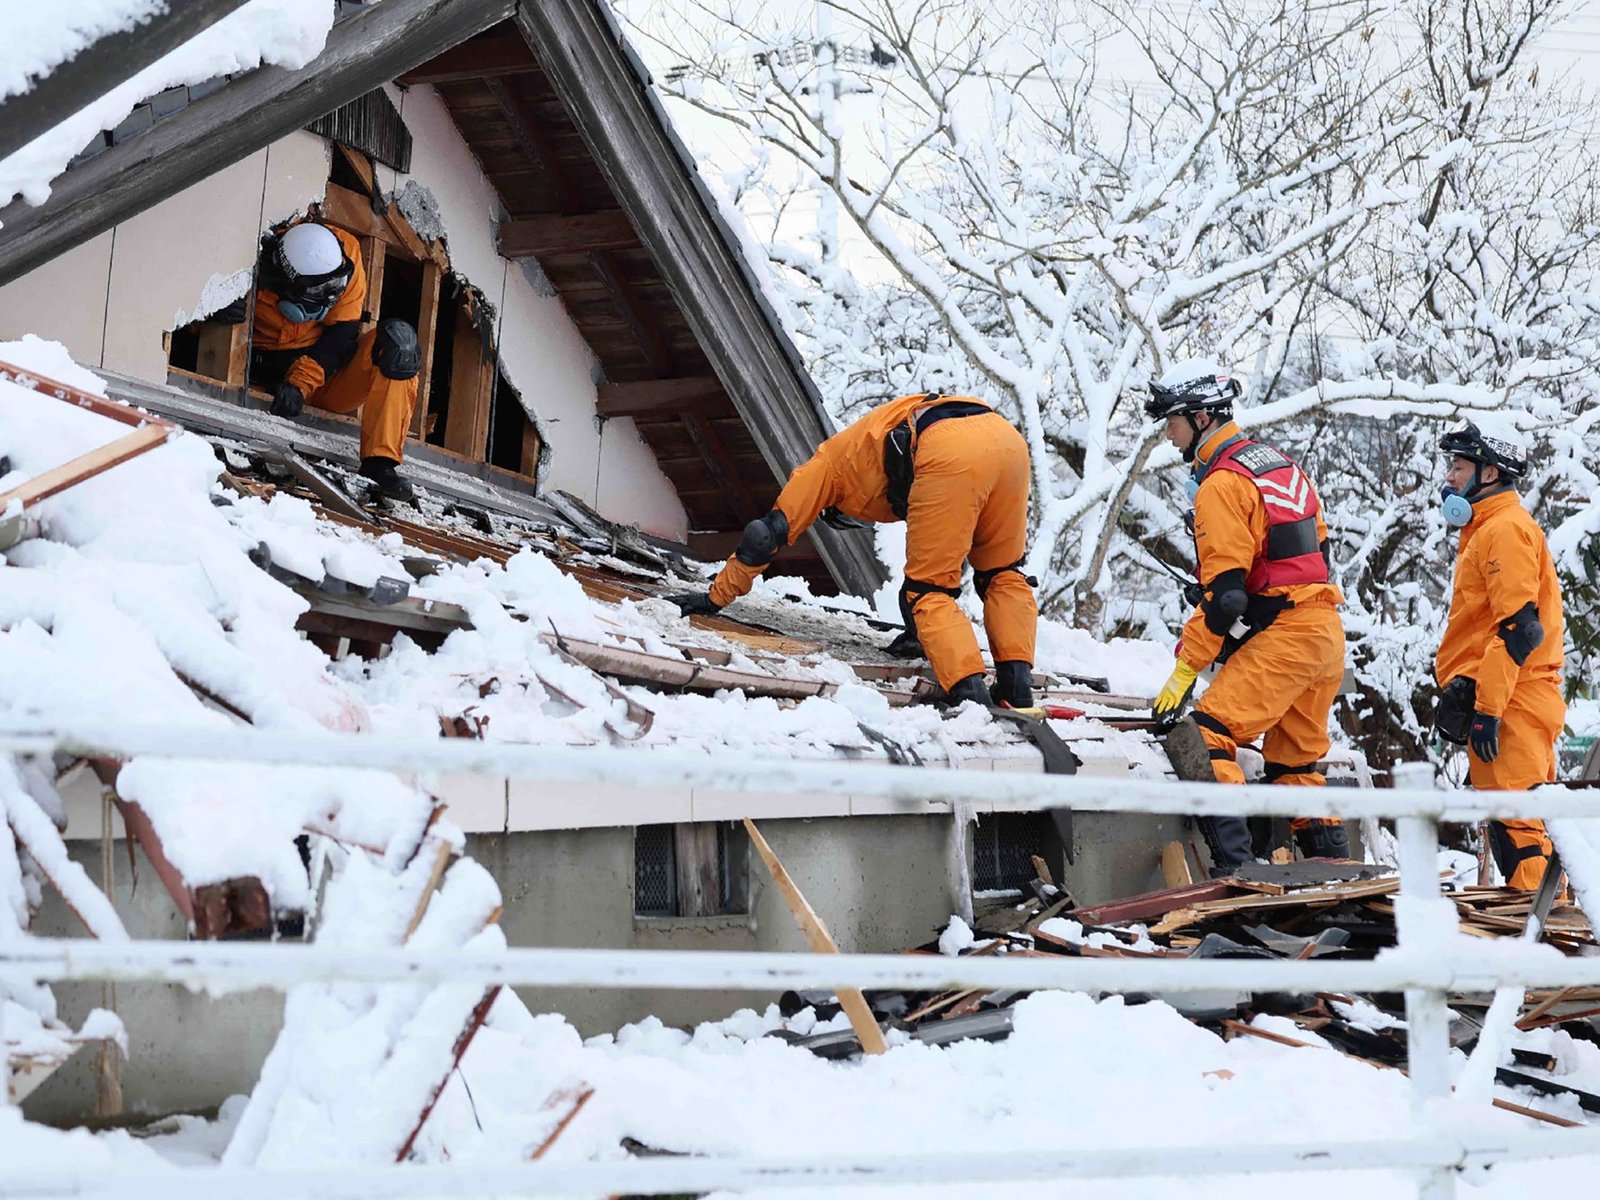 Death toll from Japanese quake jumps to 161 as snow hinders relief efforts | Earthquakes News